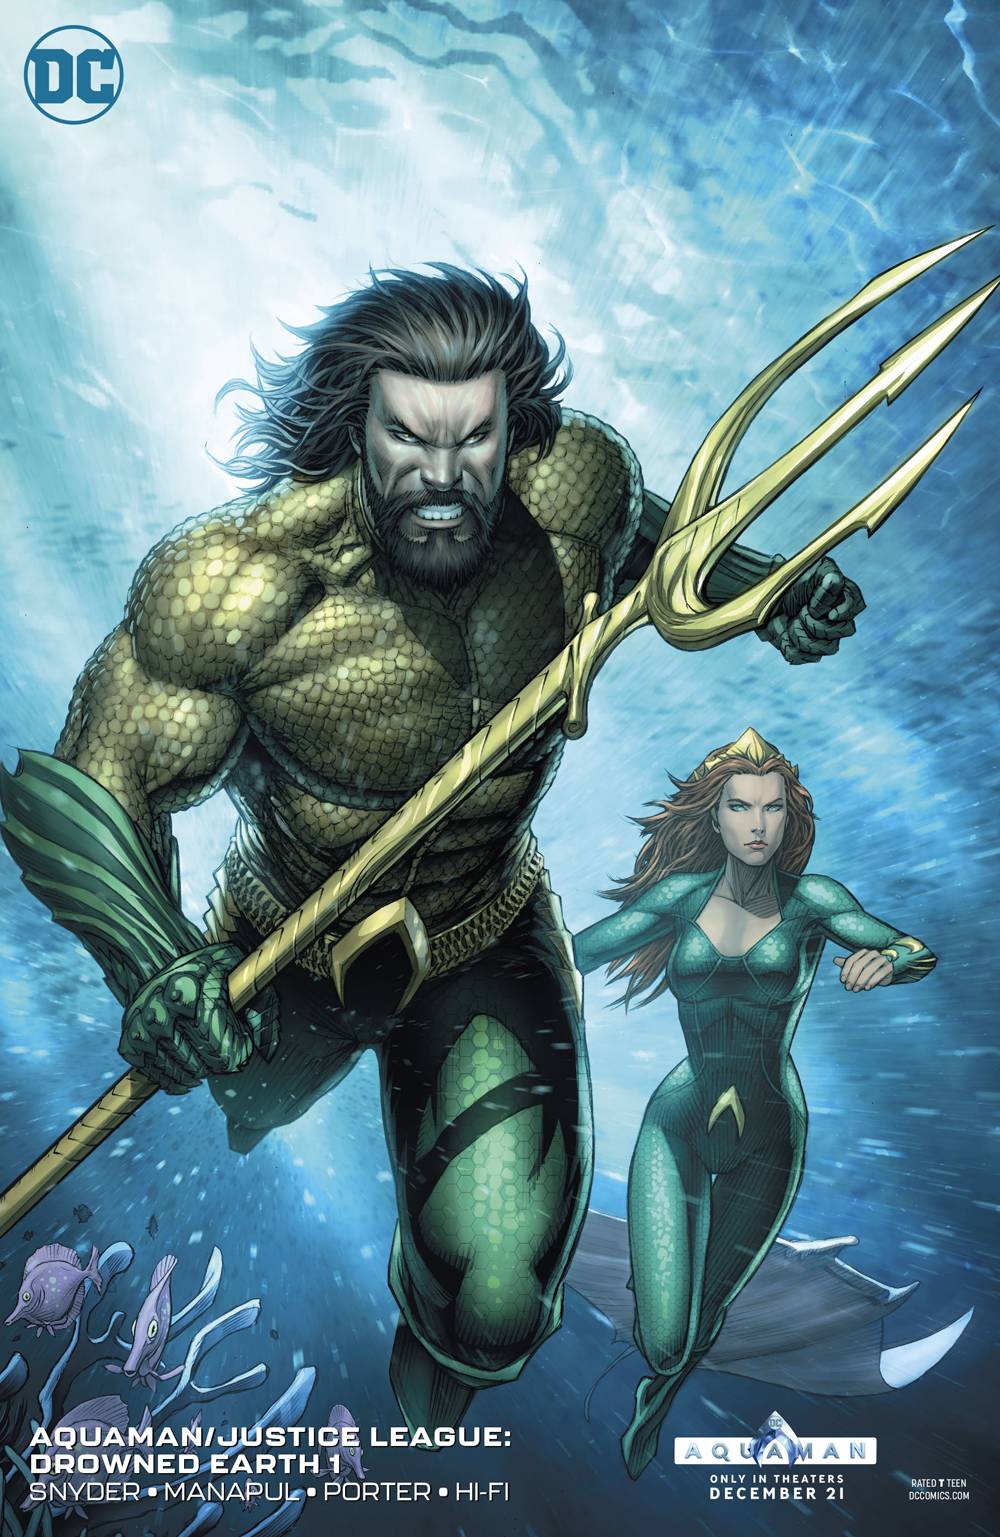 Aquaman/Justice League: Drowned Earth #1 Variant Edition (Keown) [2018]